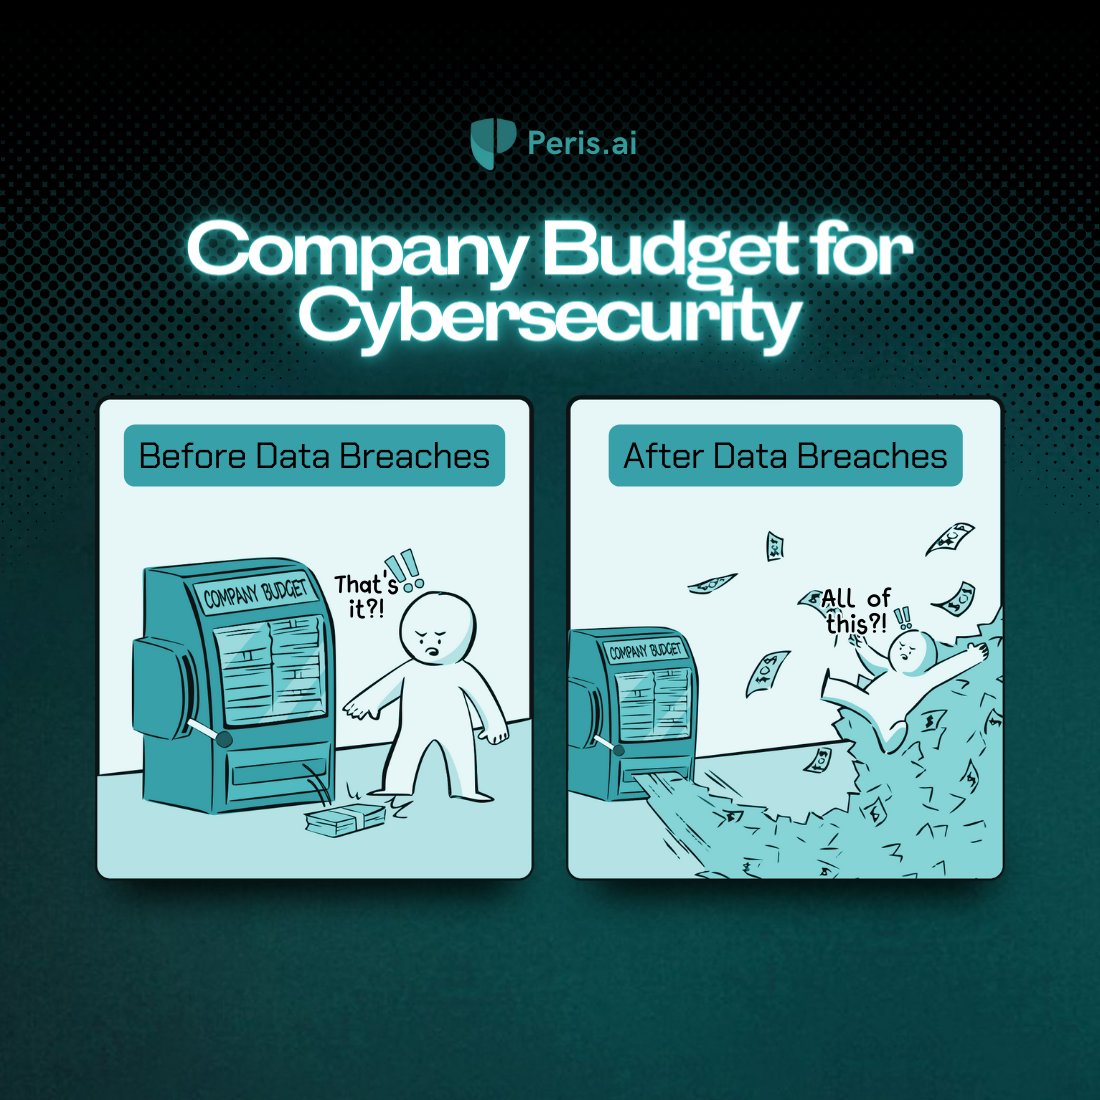 Undoubtedly, Prevention is better than incidents, as the cost of addressing them afterward far surpasses the expenses of averting them initially.

#CybersecurityBudget #DataBreachResponse #SecurityInvestment #CyberDefense #RiskMitigation #DataProtection #CyberSecurityStrategy